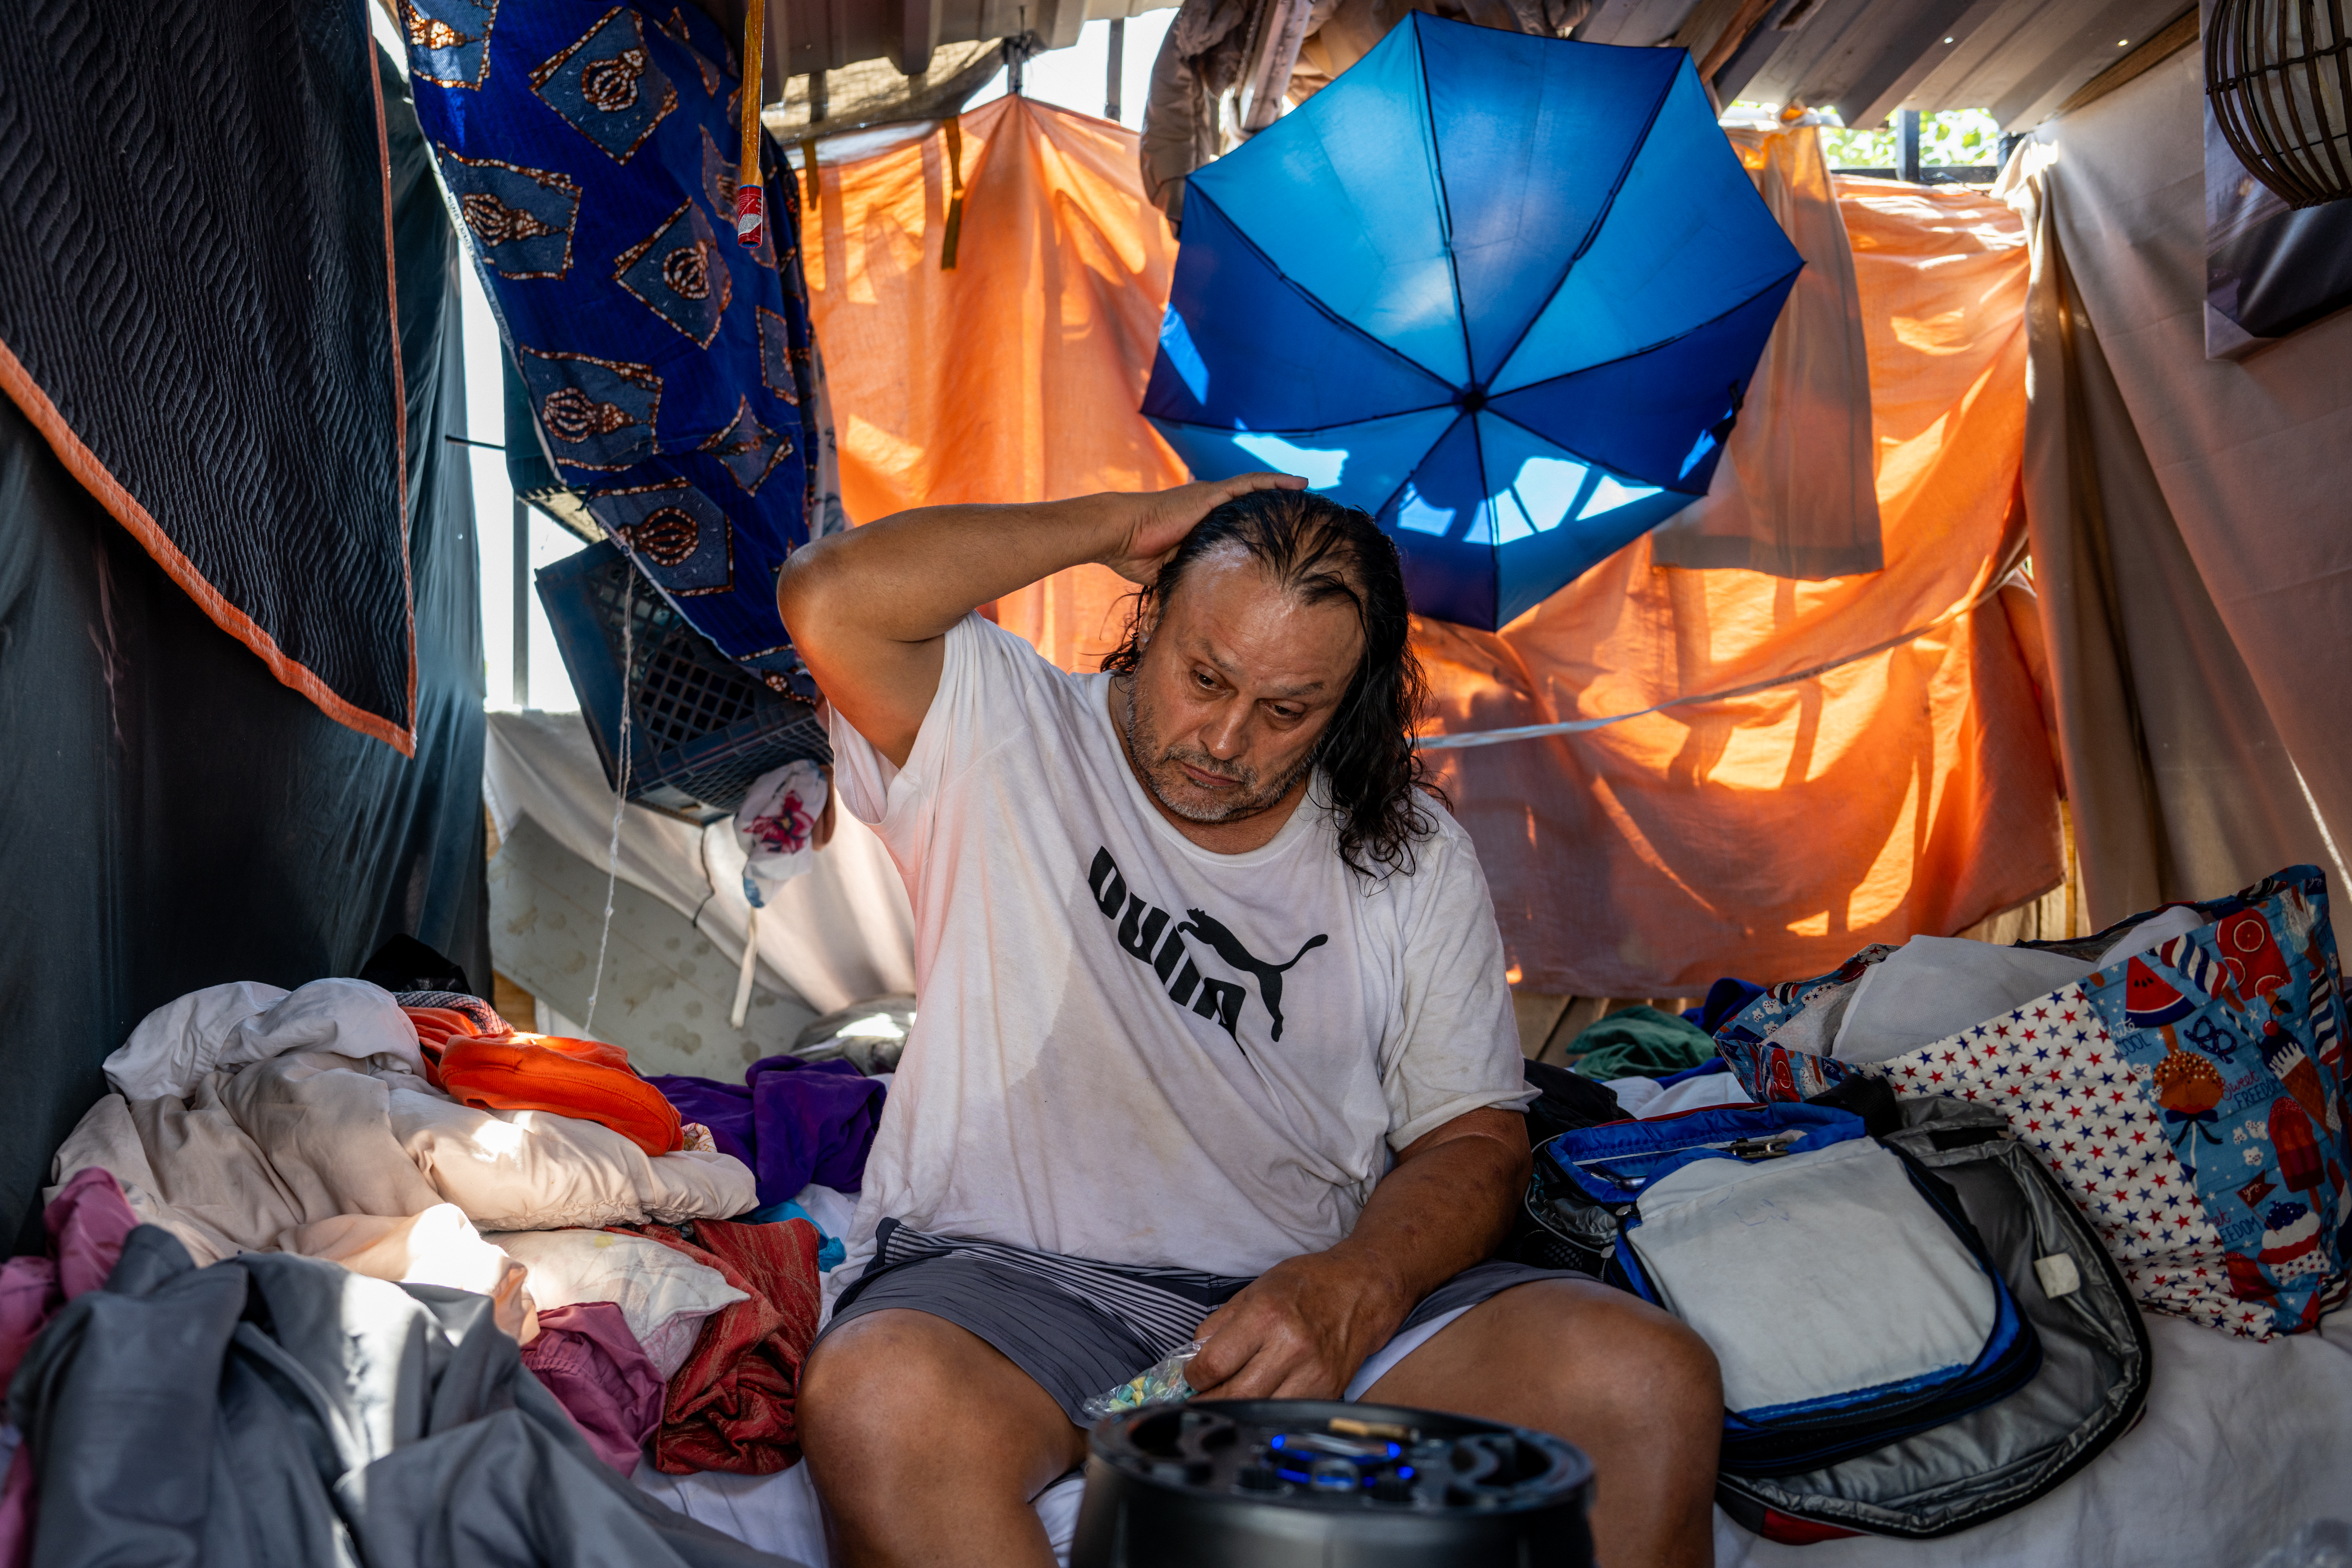 Homeless Phoenix resident Michael Soes sits in his tent after missing the bus to a cooling center on July 14, 2023. Today marks the Phoenix area's 15th consecutive day of temperatures exceeding 110 degrees. Record-breaking temperatures continue soaring as prolonged heatwaves sweep across the Southwest. Credit: Brandon Bell/Getty Images